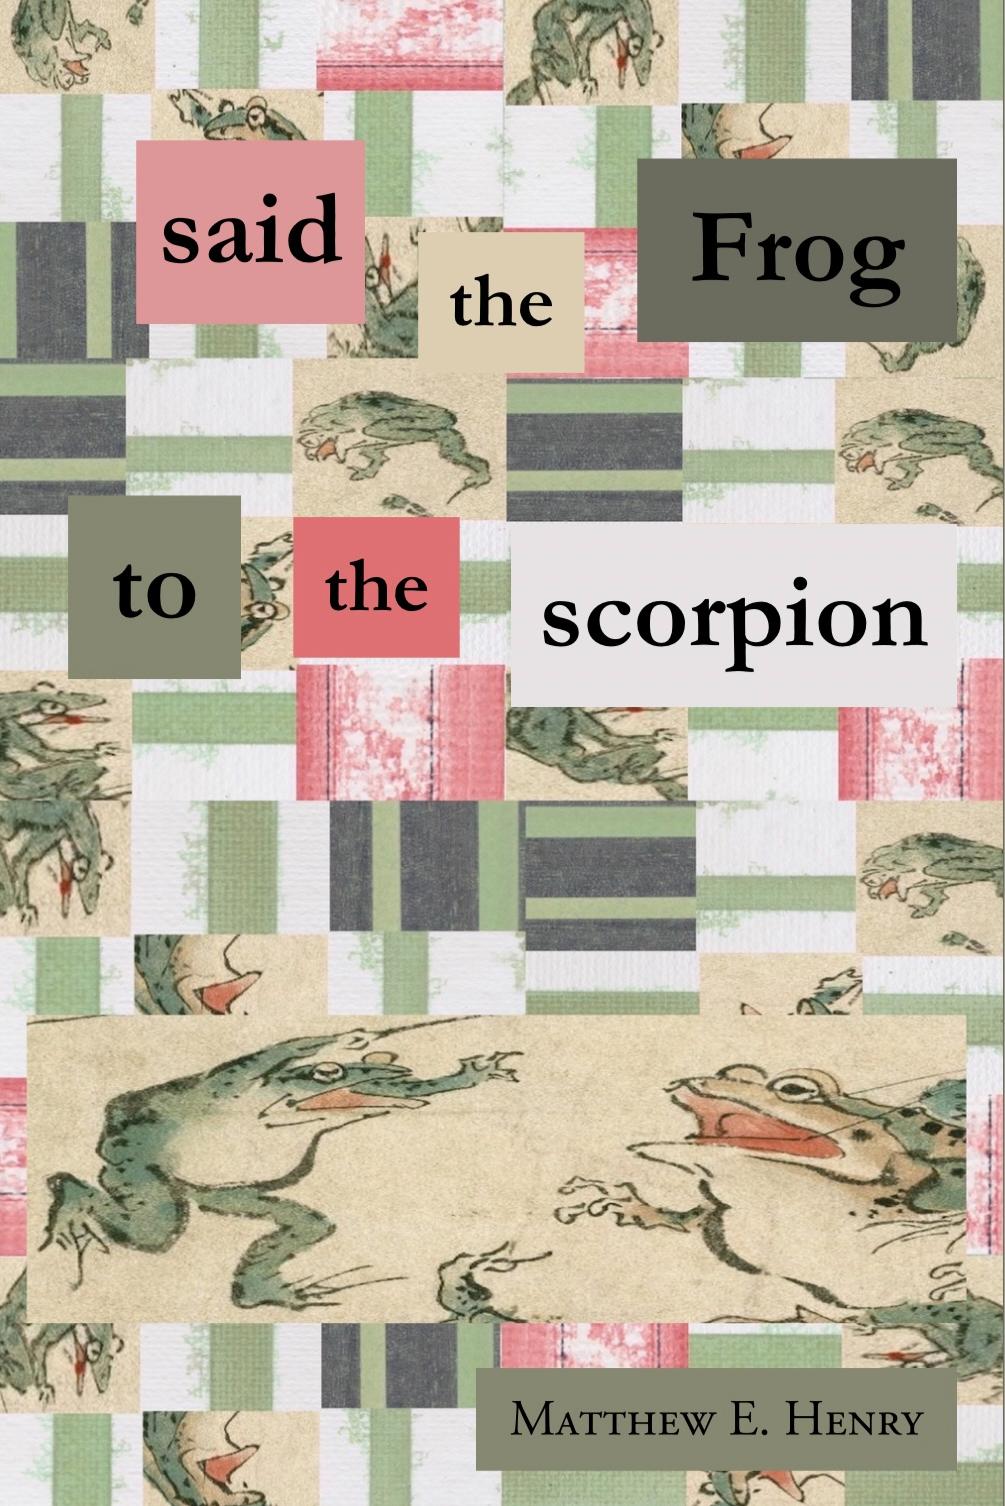 Book cover of said the Frog to the scorpion  by MEH